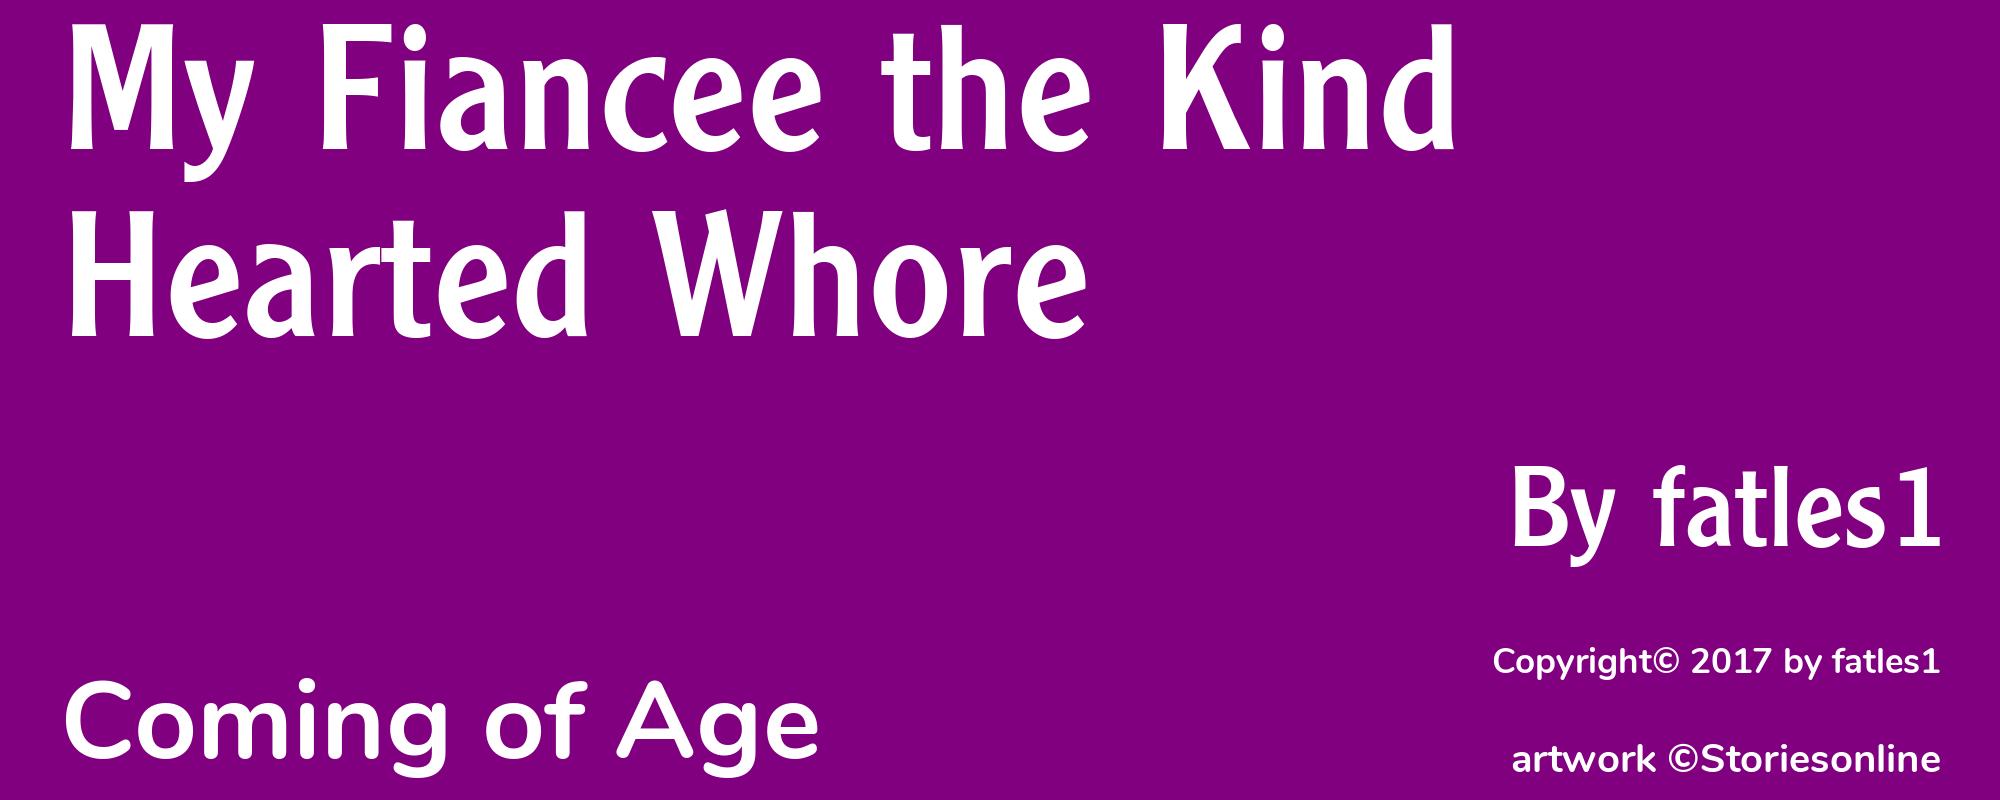 My Fiancee the Kind Hearted Whore - Cover